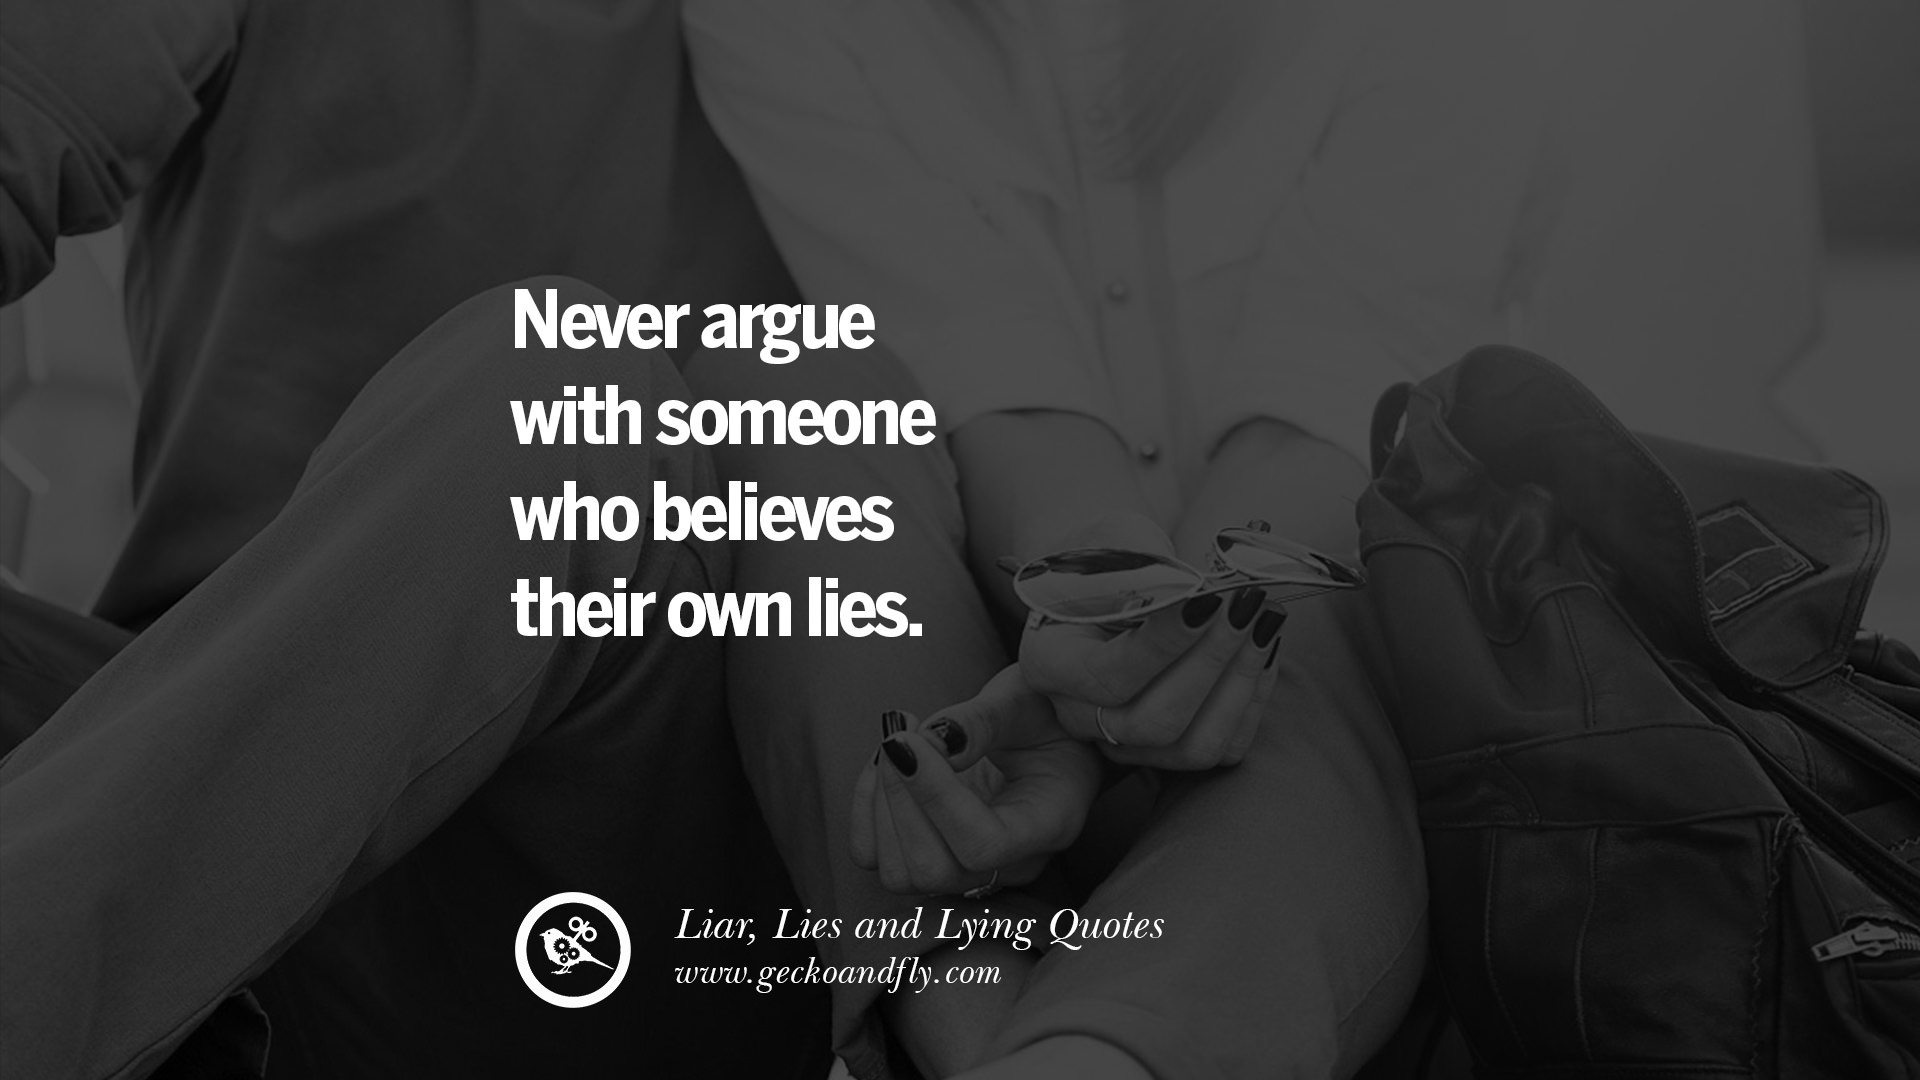 60 Quotes About Liar Lies And Lying Boyfriend In A Relationship 5144